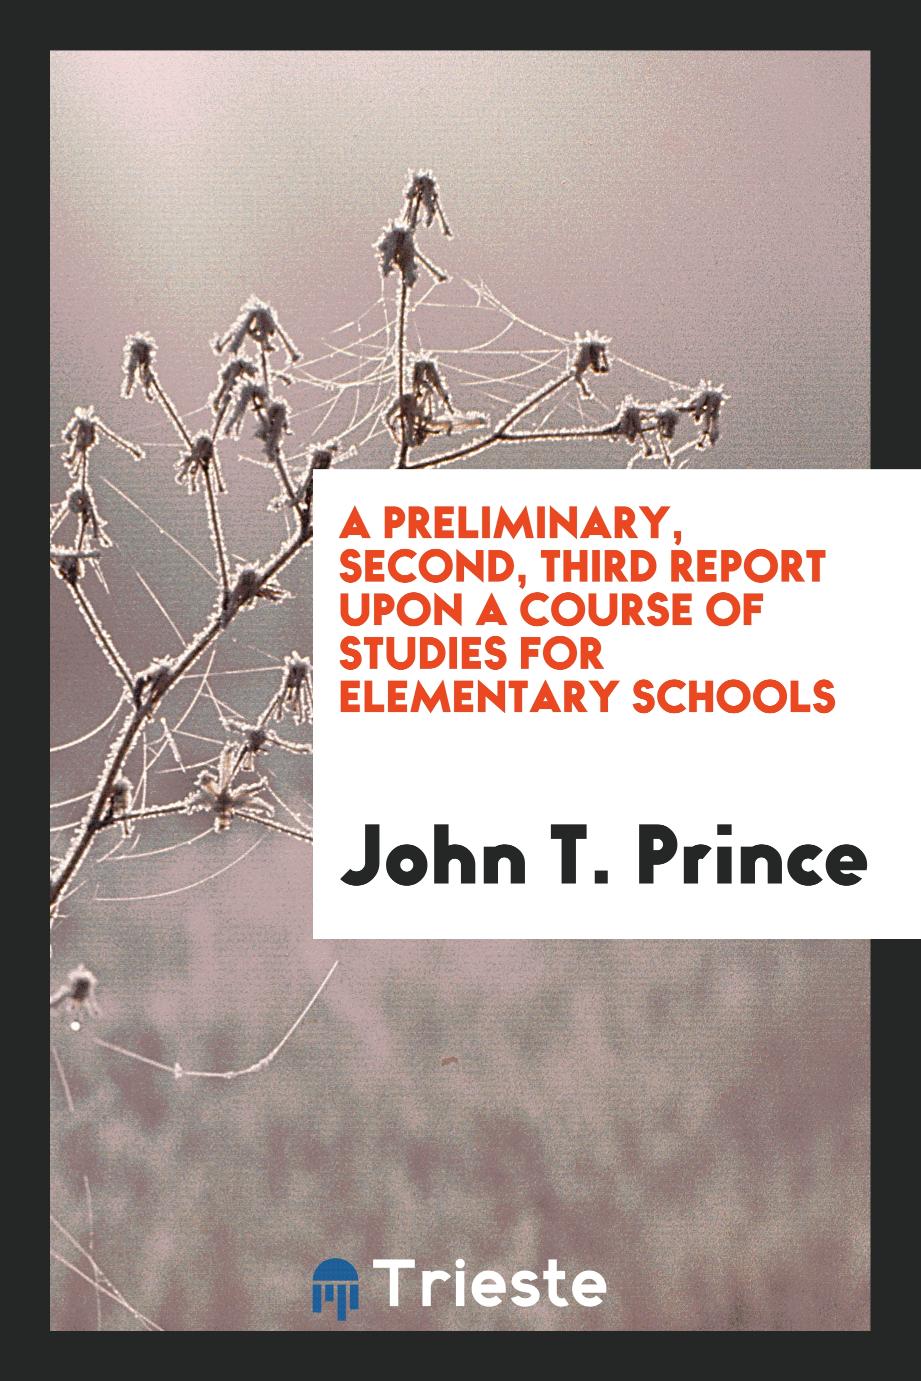 A Preliminary, Second, Third Report Upon a Course of Studies for Elementary Schools